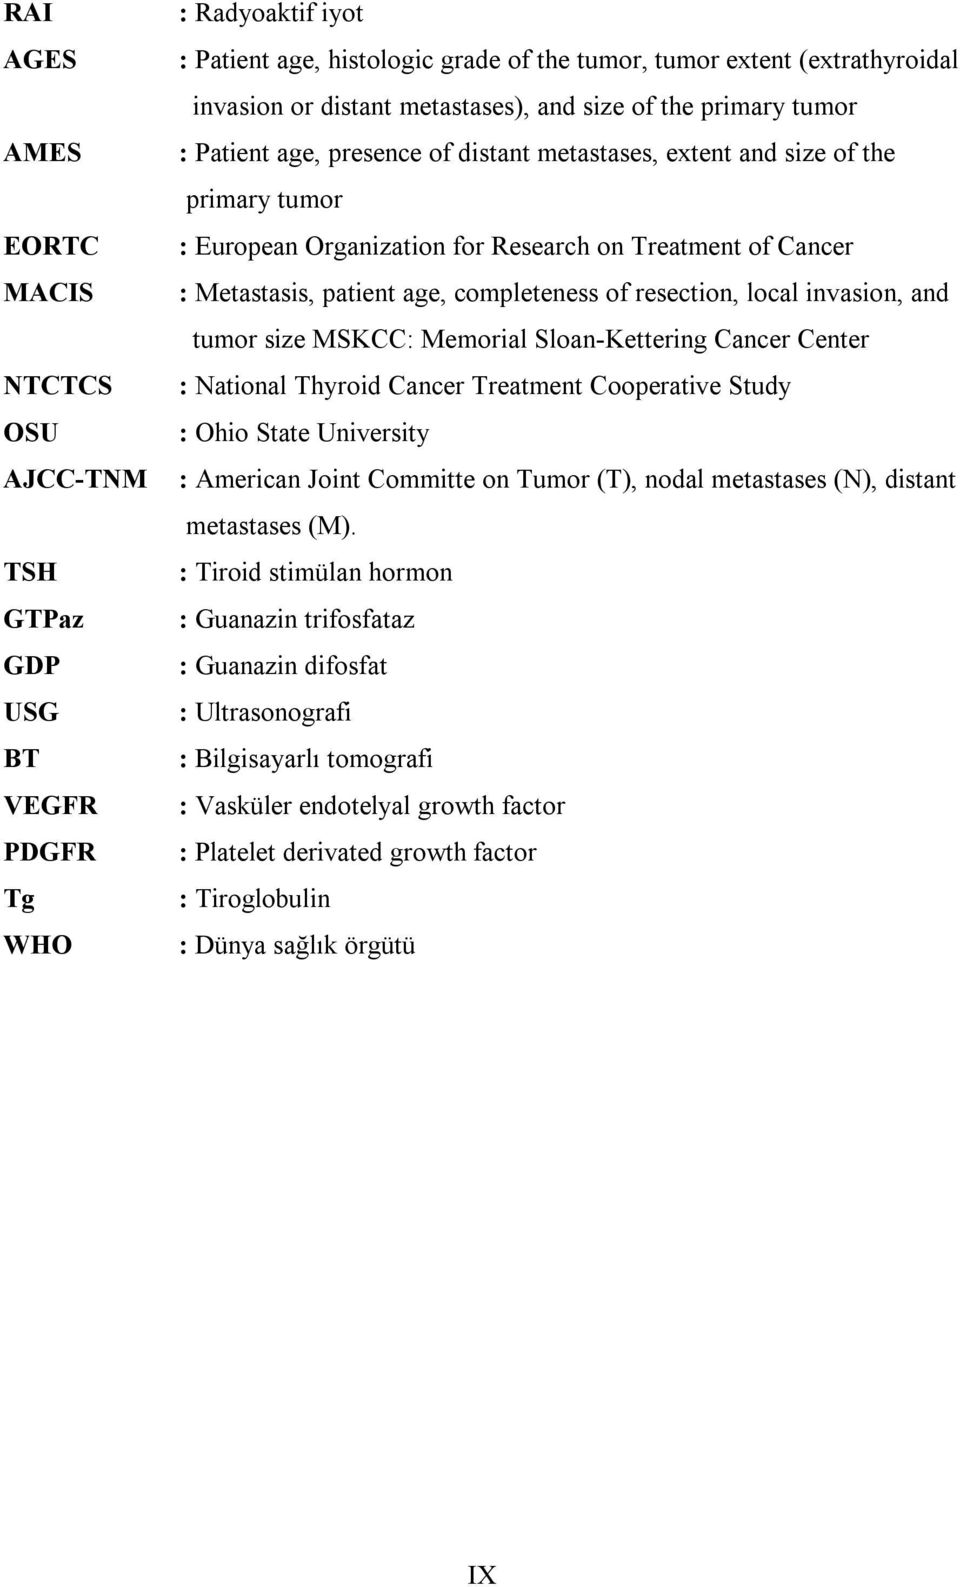 Metastasis, patient age, completeness of resection, local invasion, and tumor size MSKCC: Memorial Sloan-Kettering Cancer Center : National Thyroid Cancer Treatment Cooperative Study : Ohio State